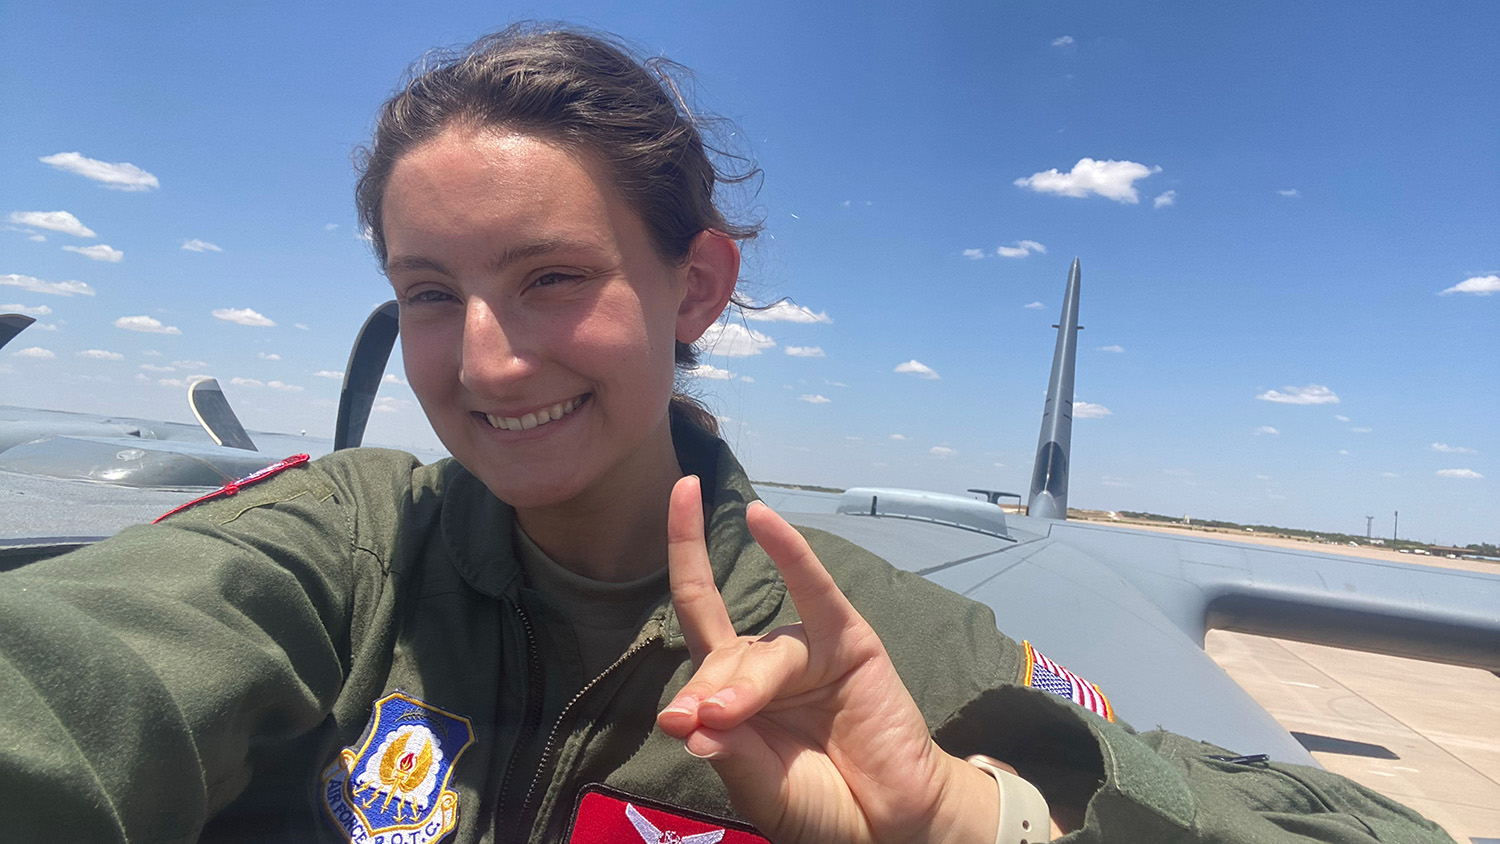 NC State ROTC cadet Rileigh Sevigny attended Project Tuskegee 2.0 in Abilene Texas this summer, and learned about B-1 bombers.